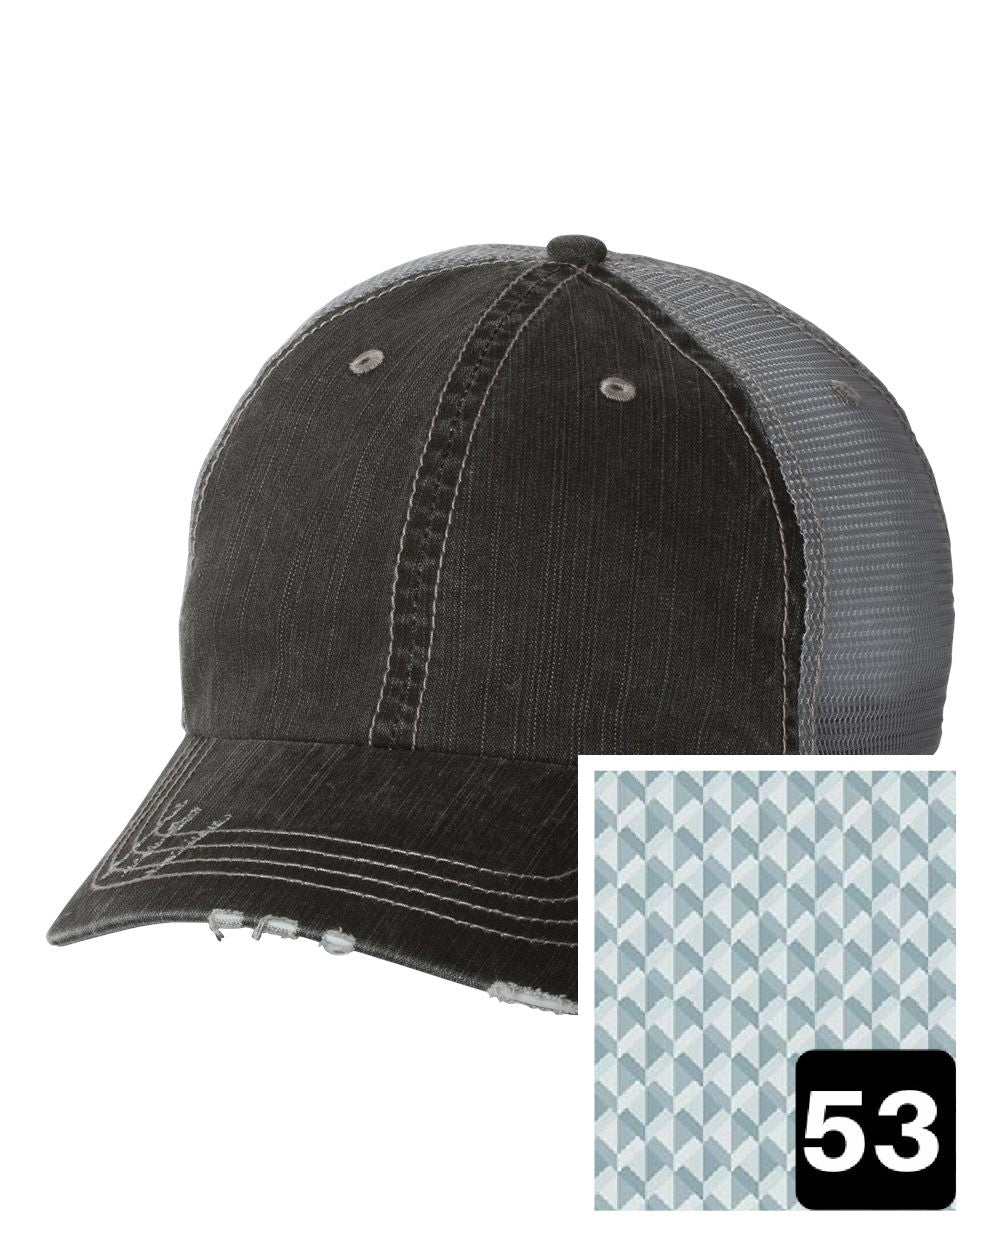 gray distressed trucker hat with multi-color stripe fabric state of Utah